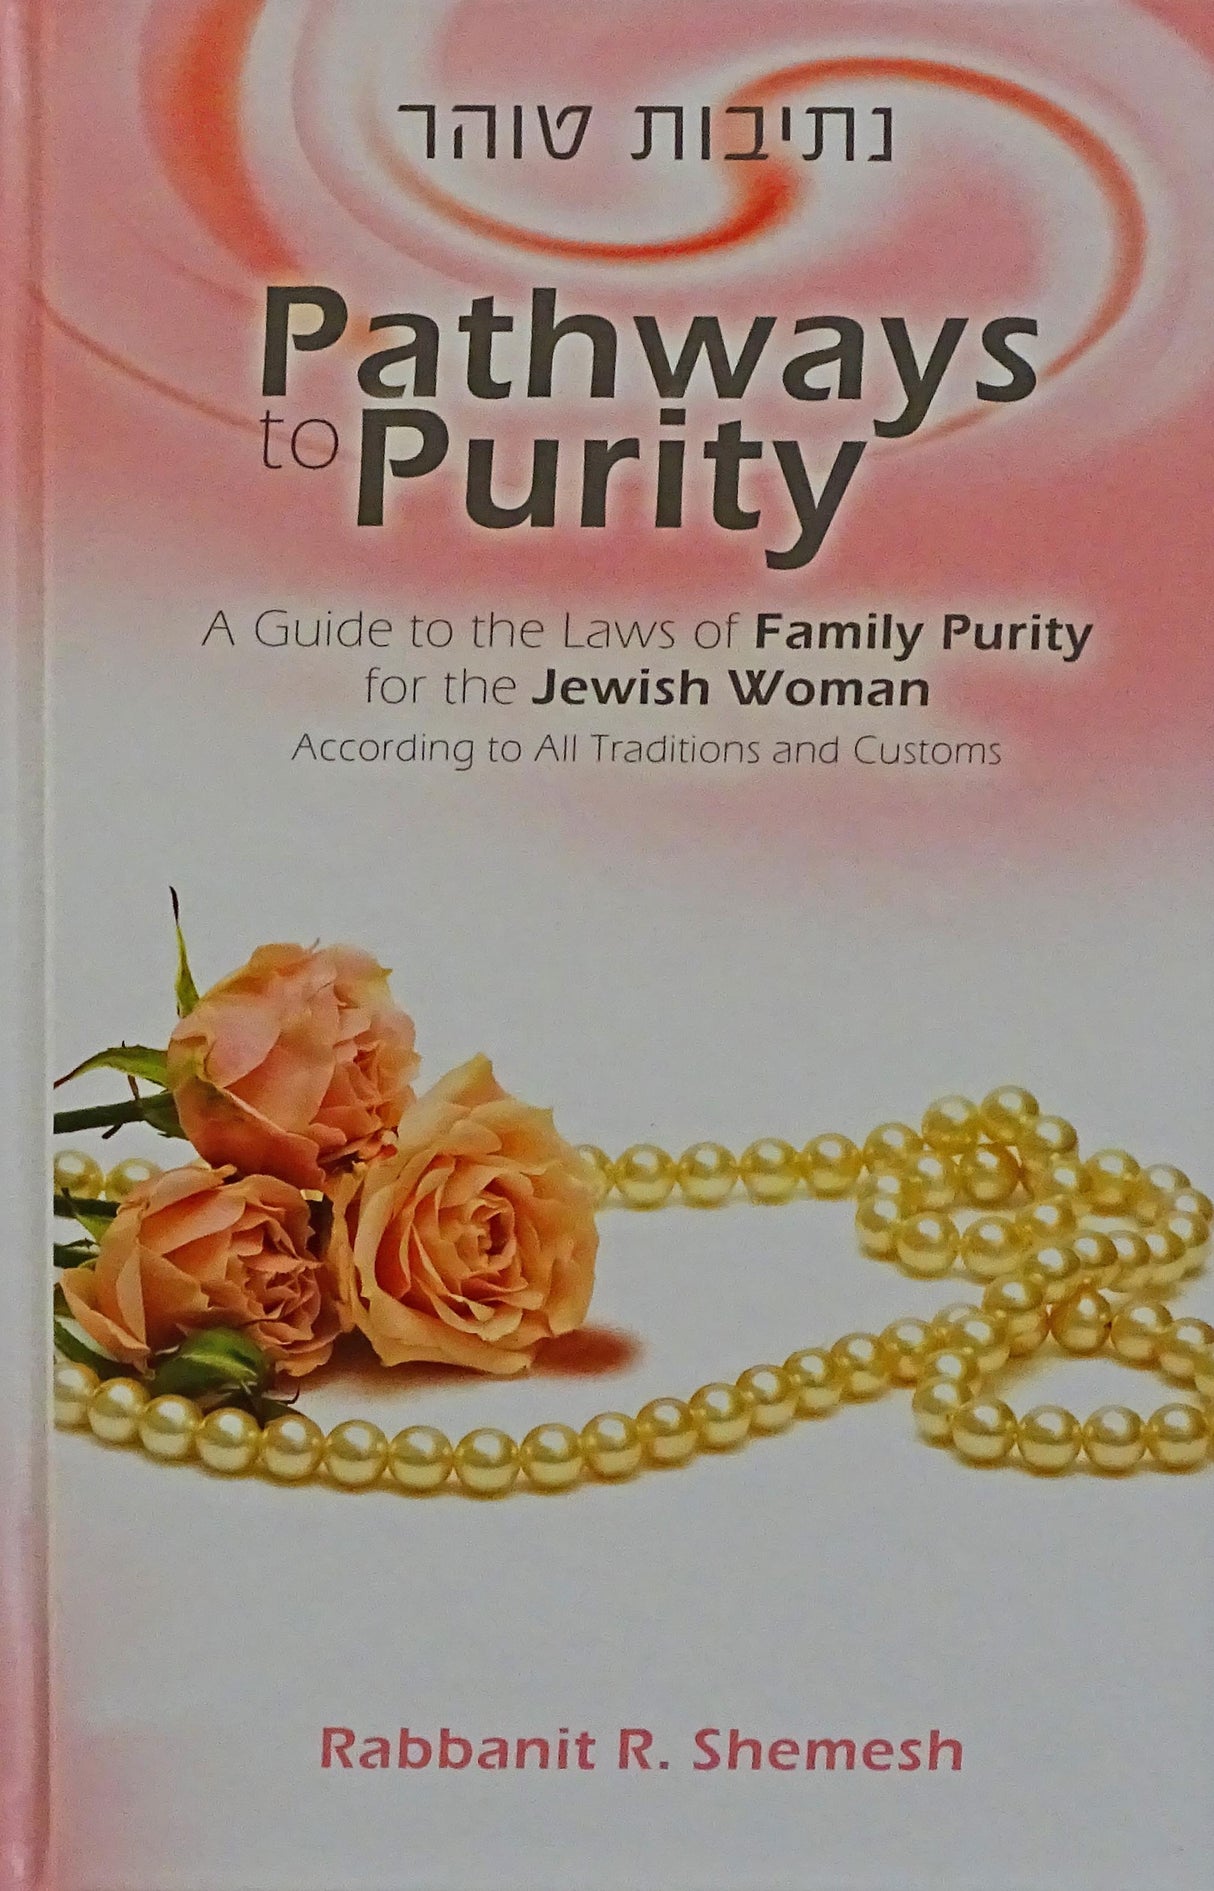 Pathways to Purity